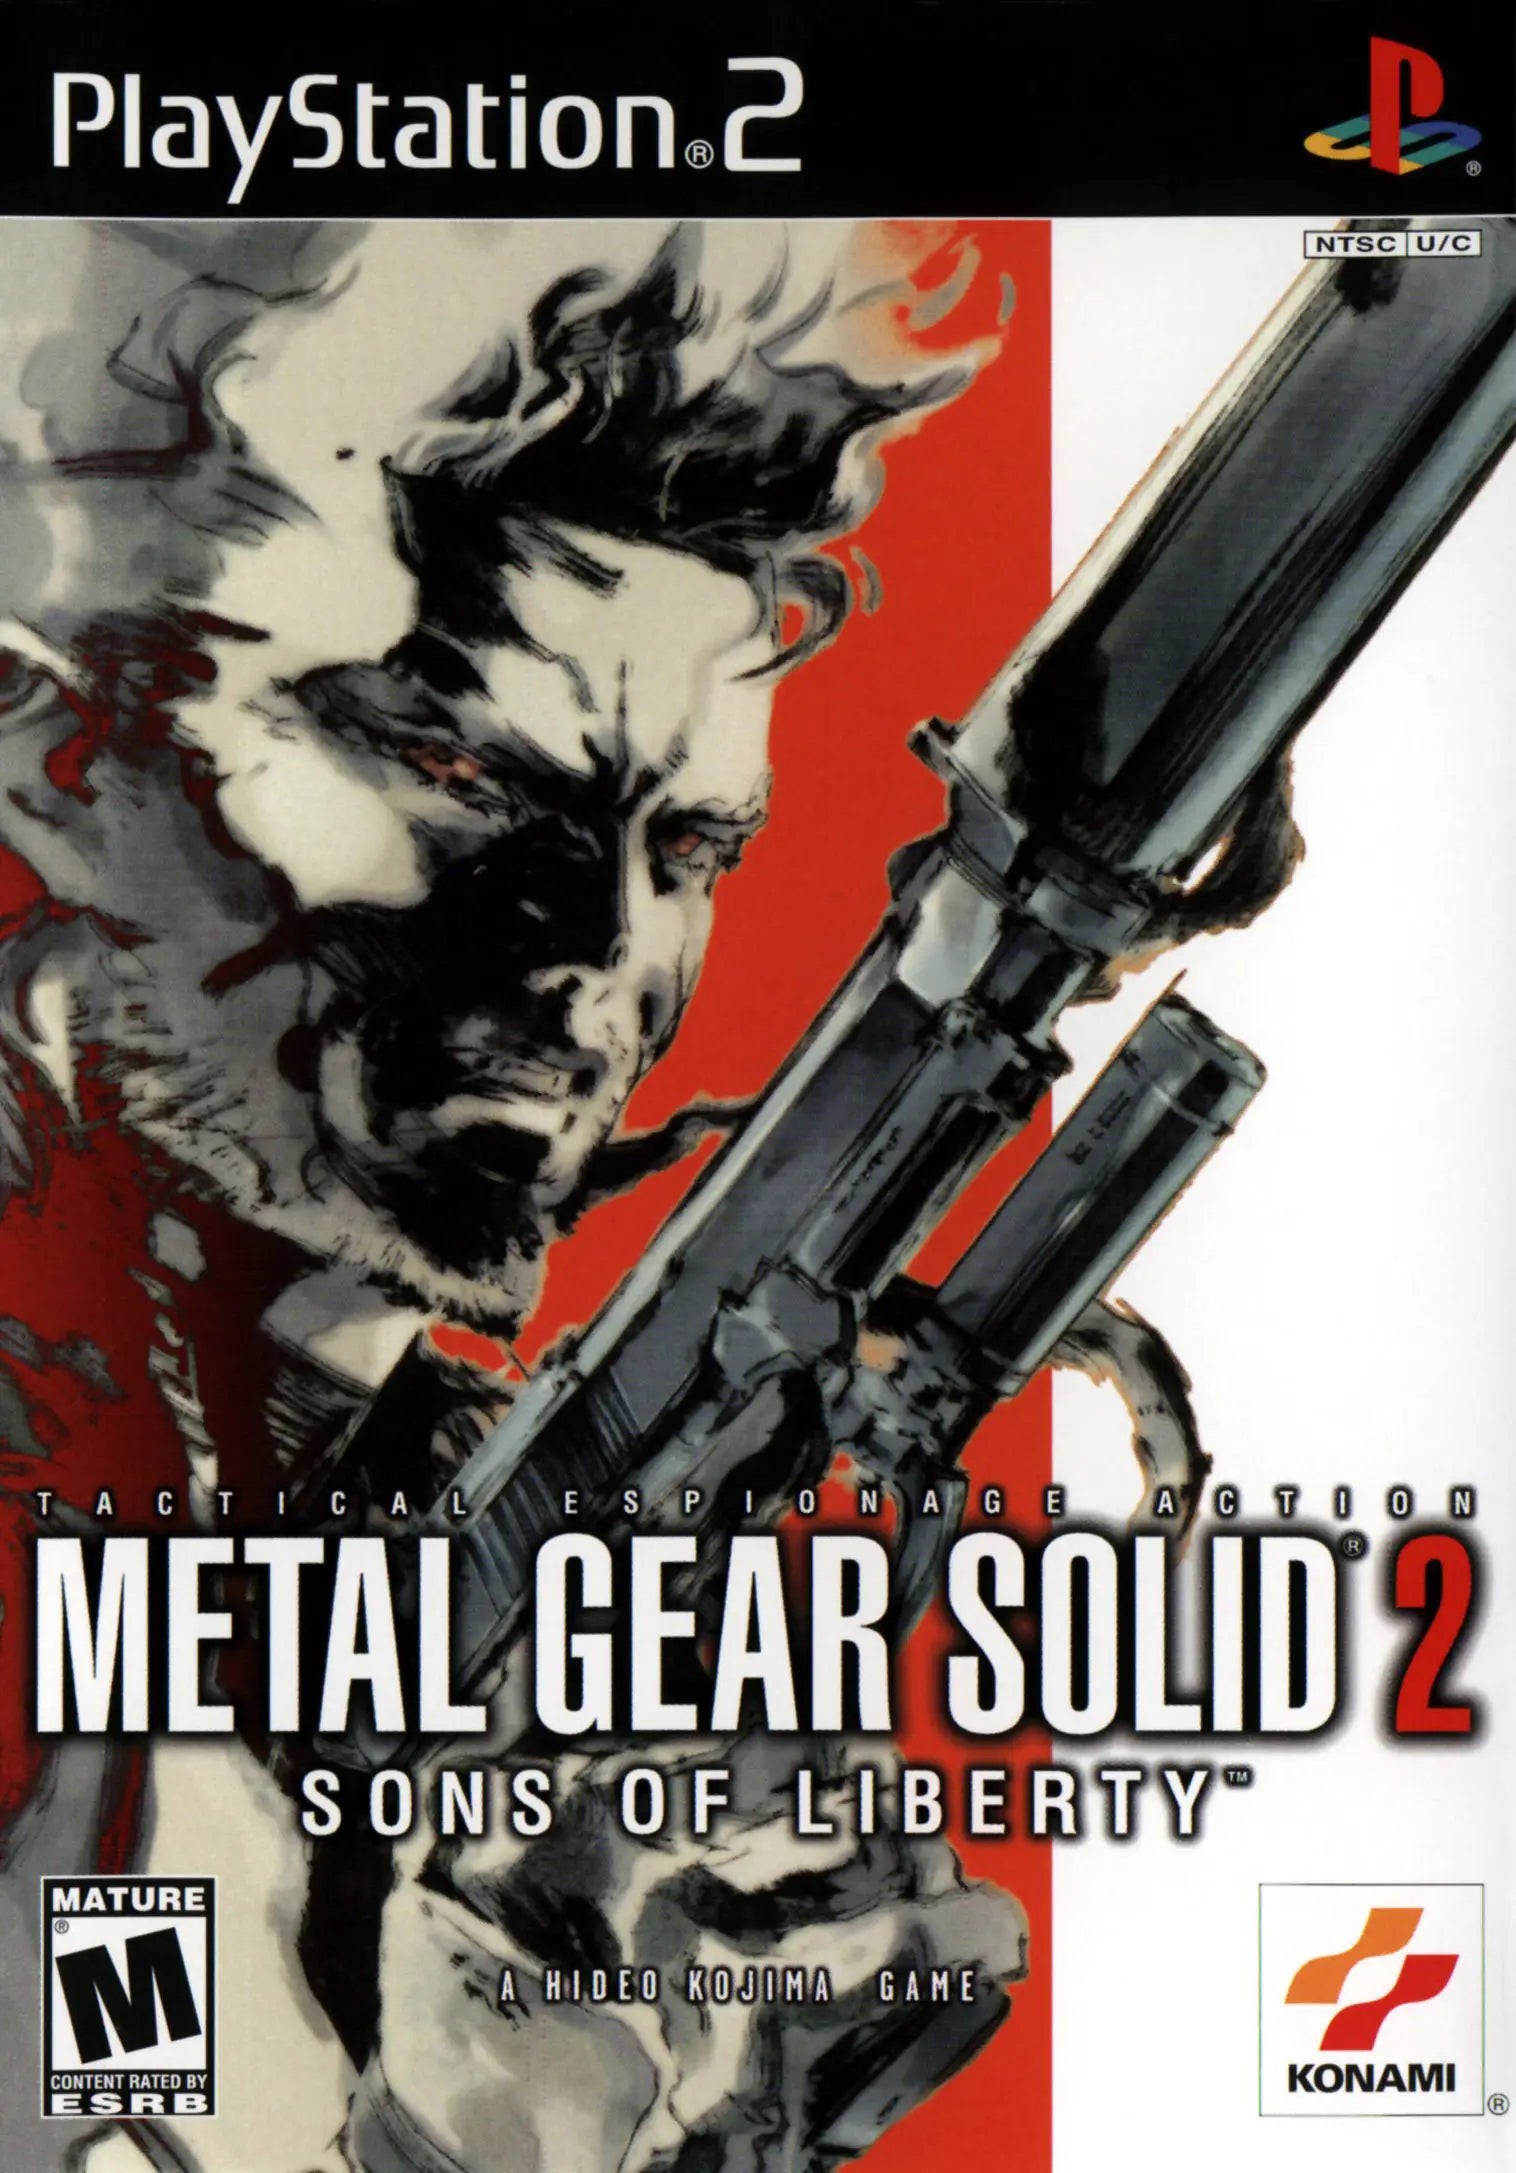 Metal Gear Solid 2 Sons of Liberty - Sony PlayStation 2 (PS2)